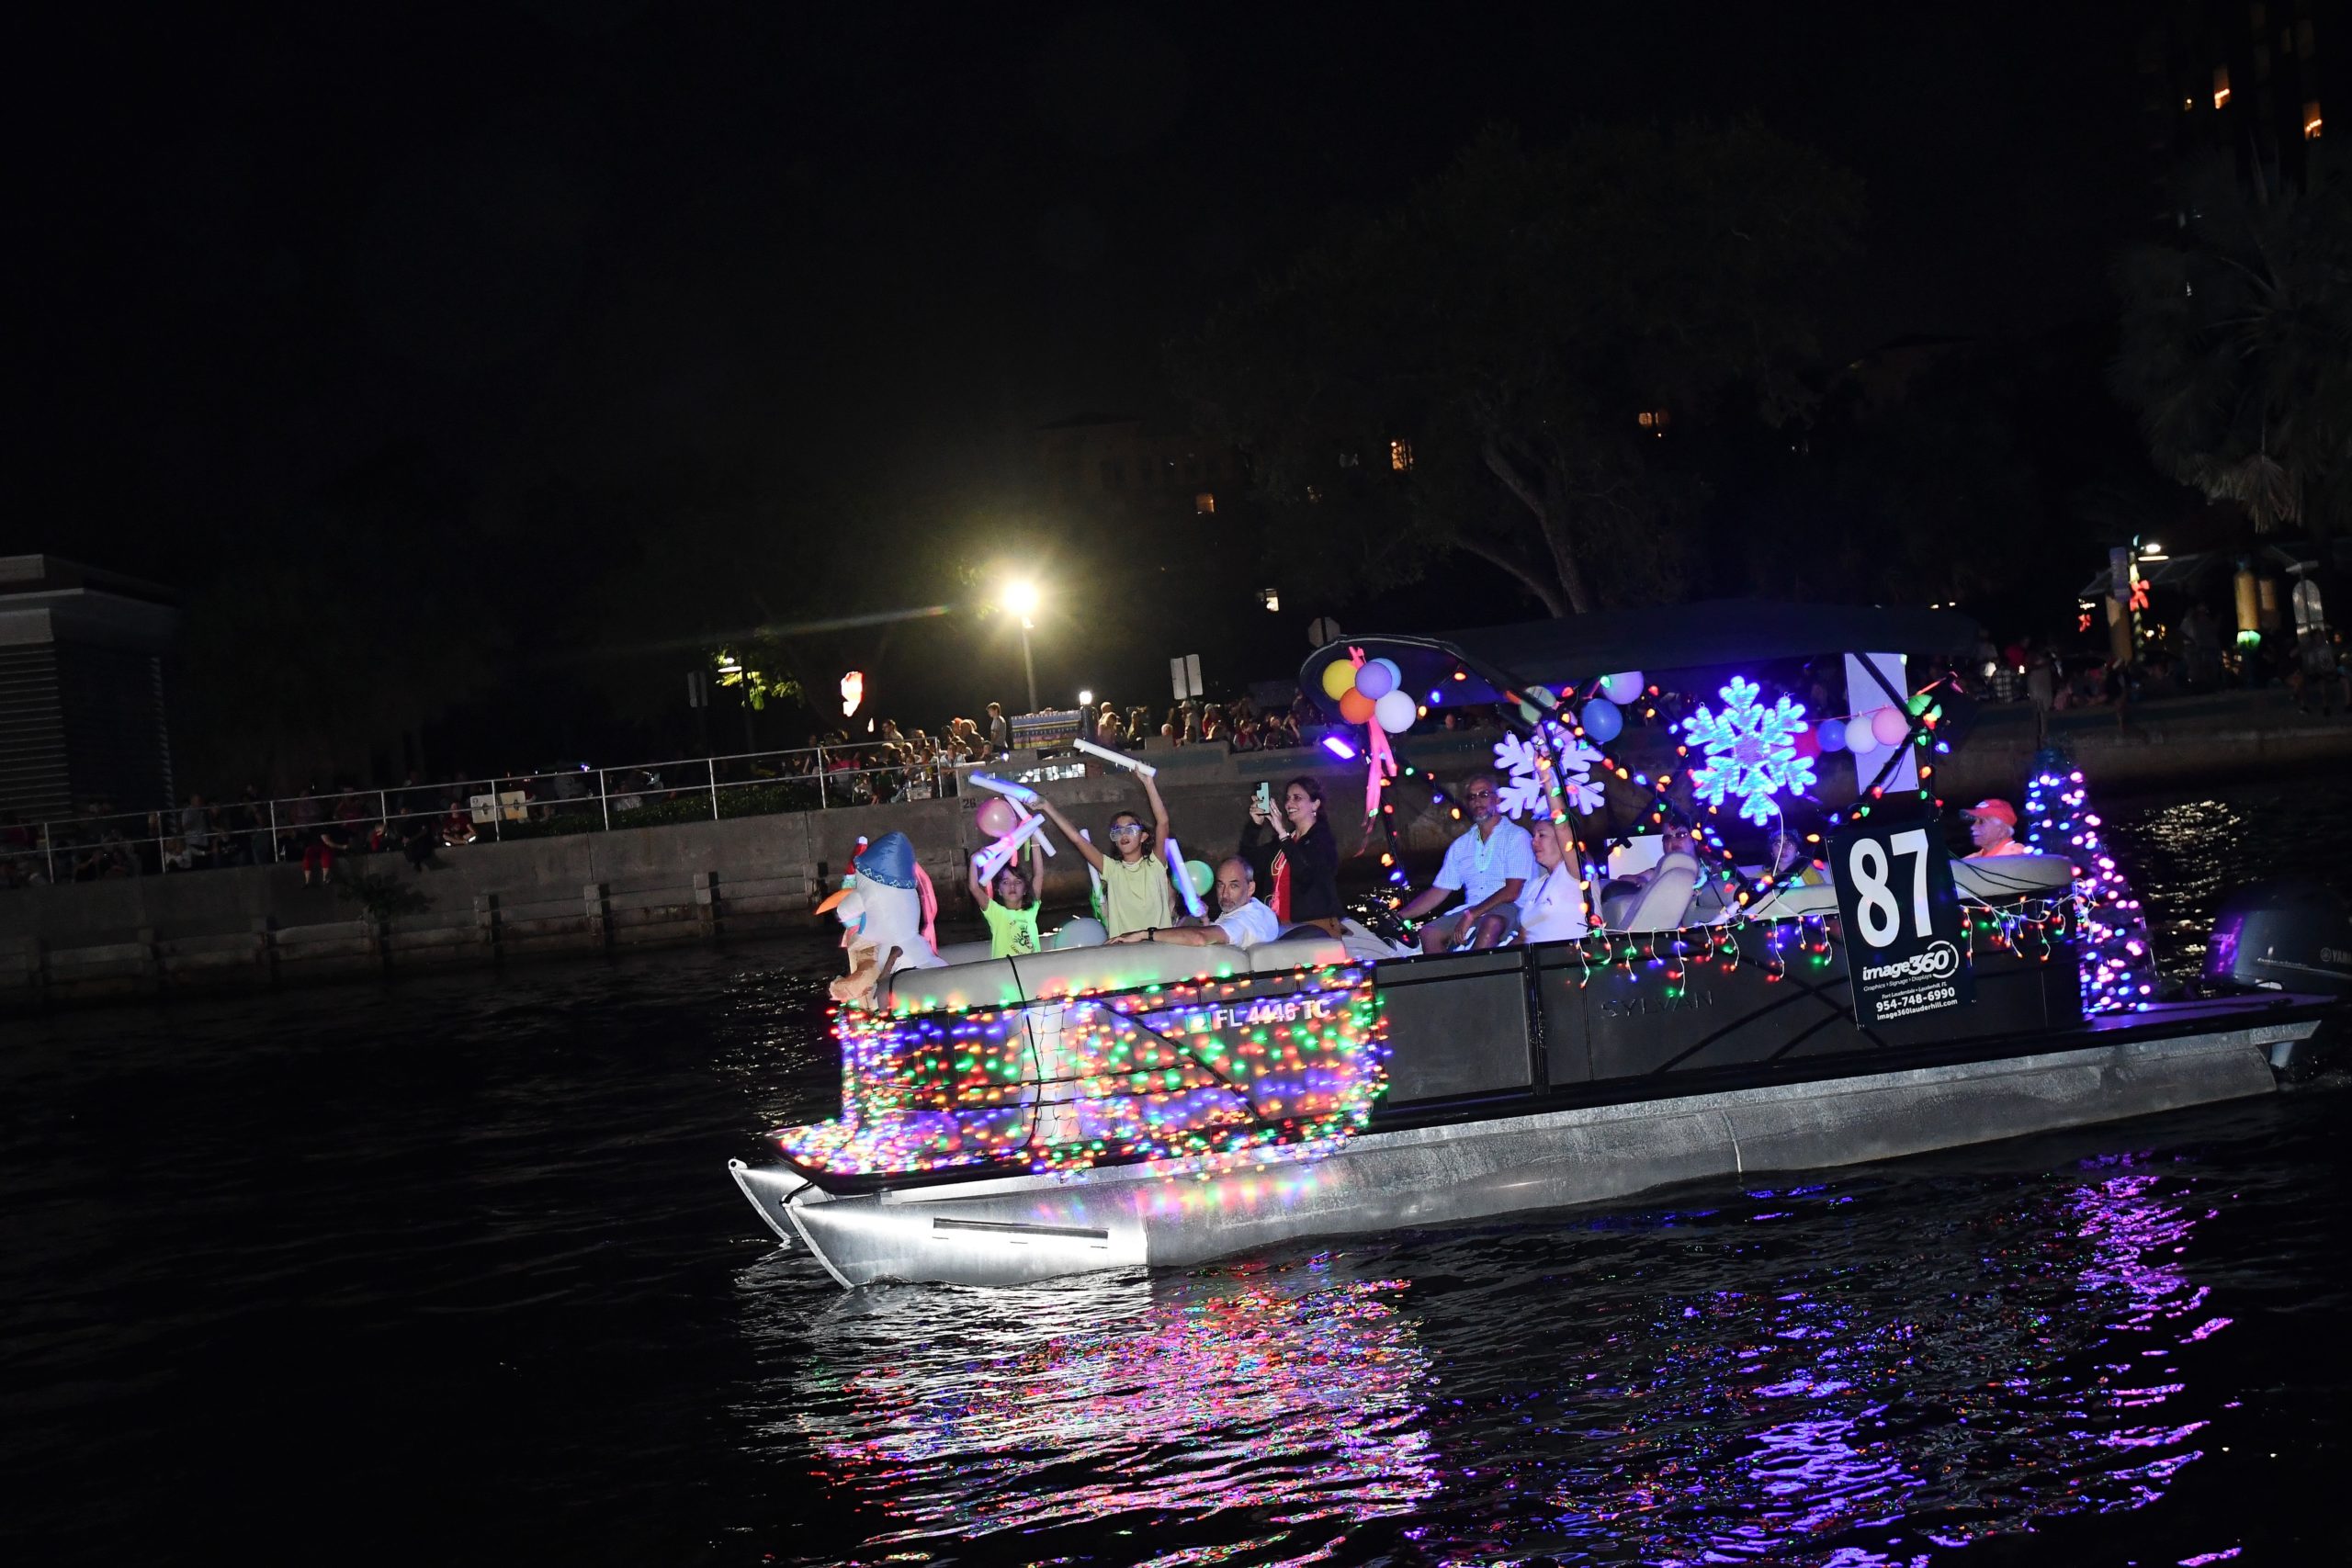 Tooned Out, boat number 87 in the 2022 Winterfest Boat Parade